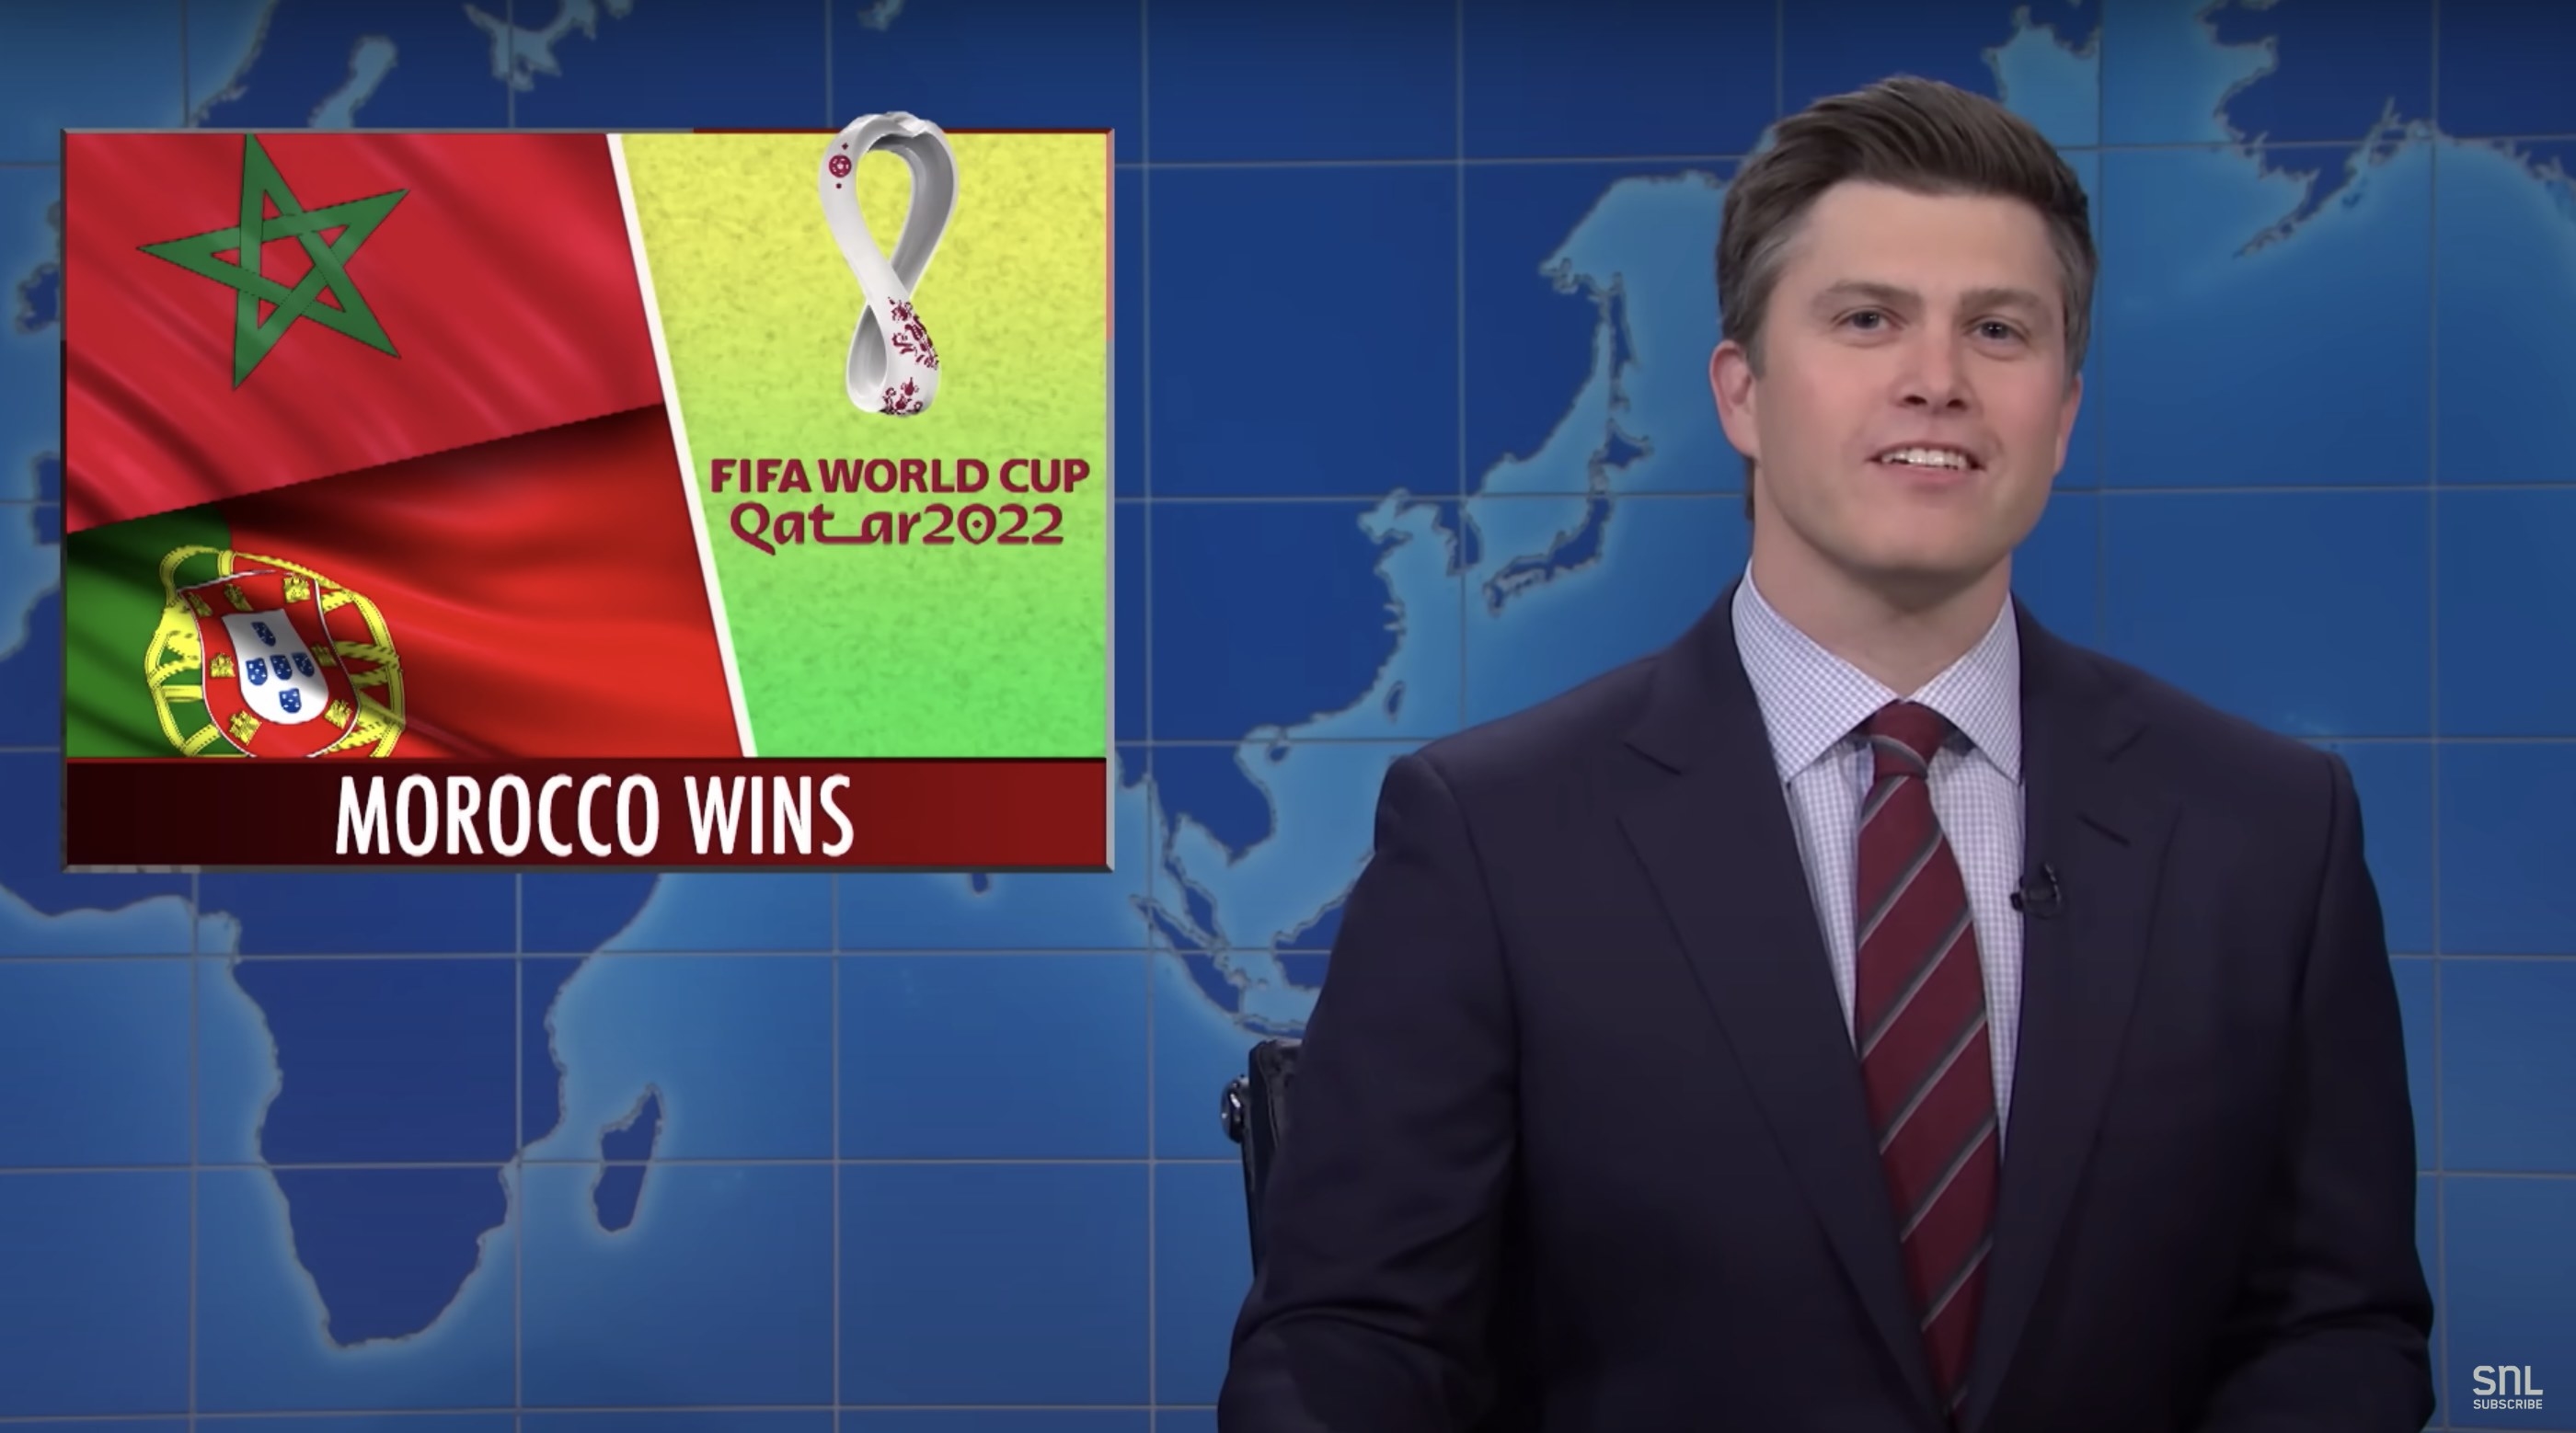 Colin at the Weekend Update desk with &quot;Morocco wins&quot; headline